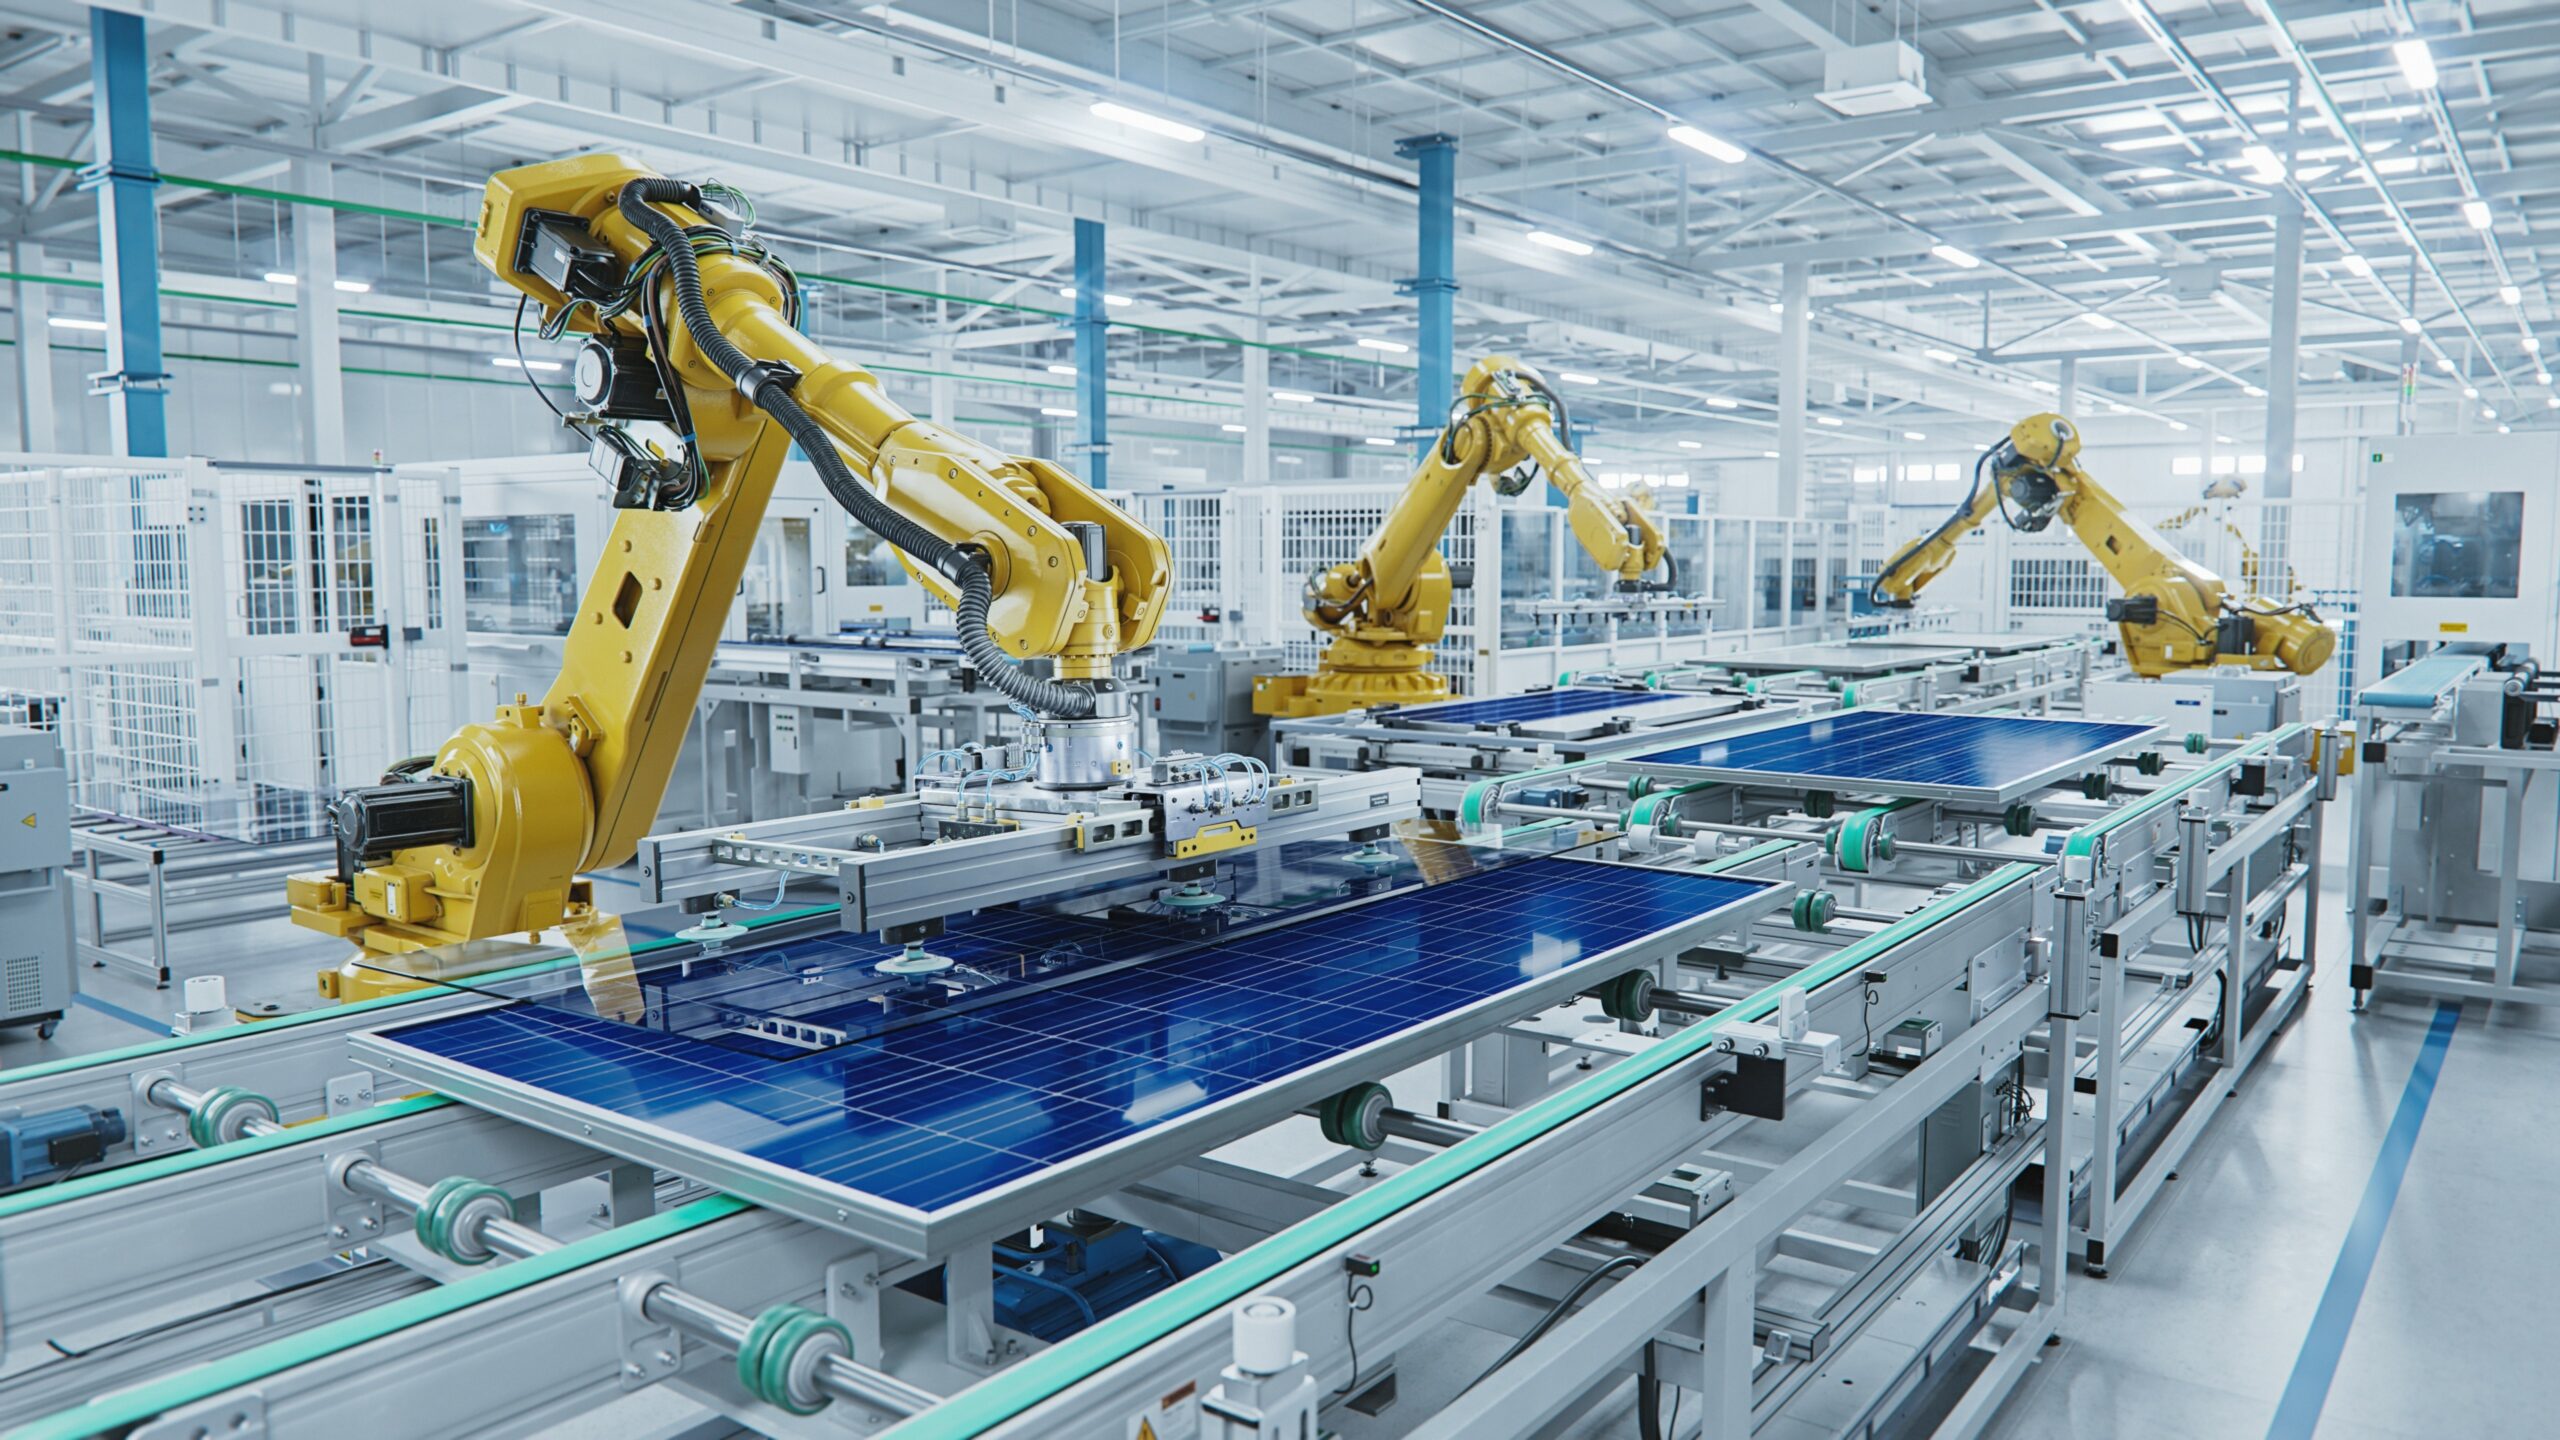 Large Production Line with Industrial Robot Arms at Modern Brigh